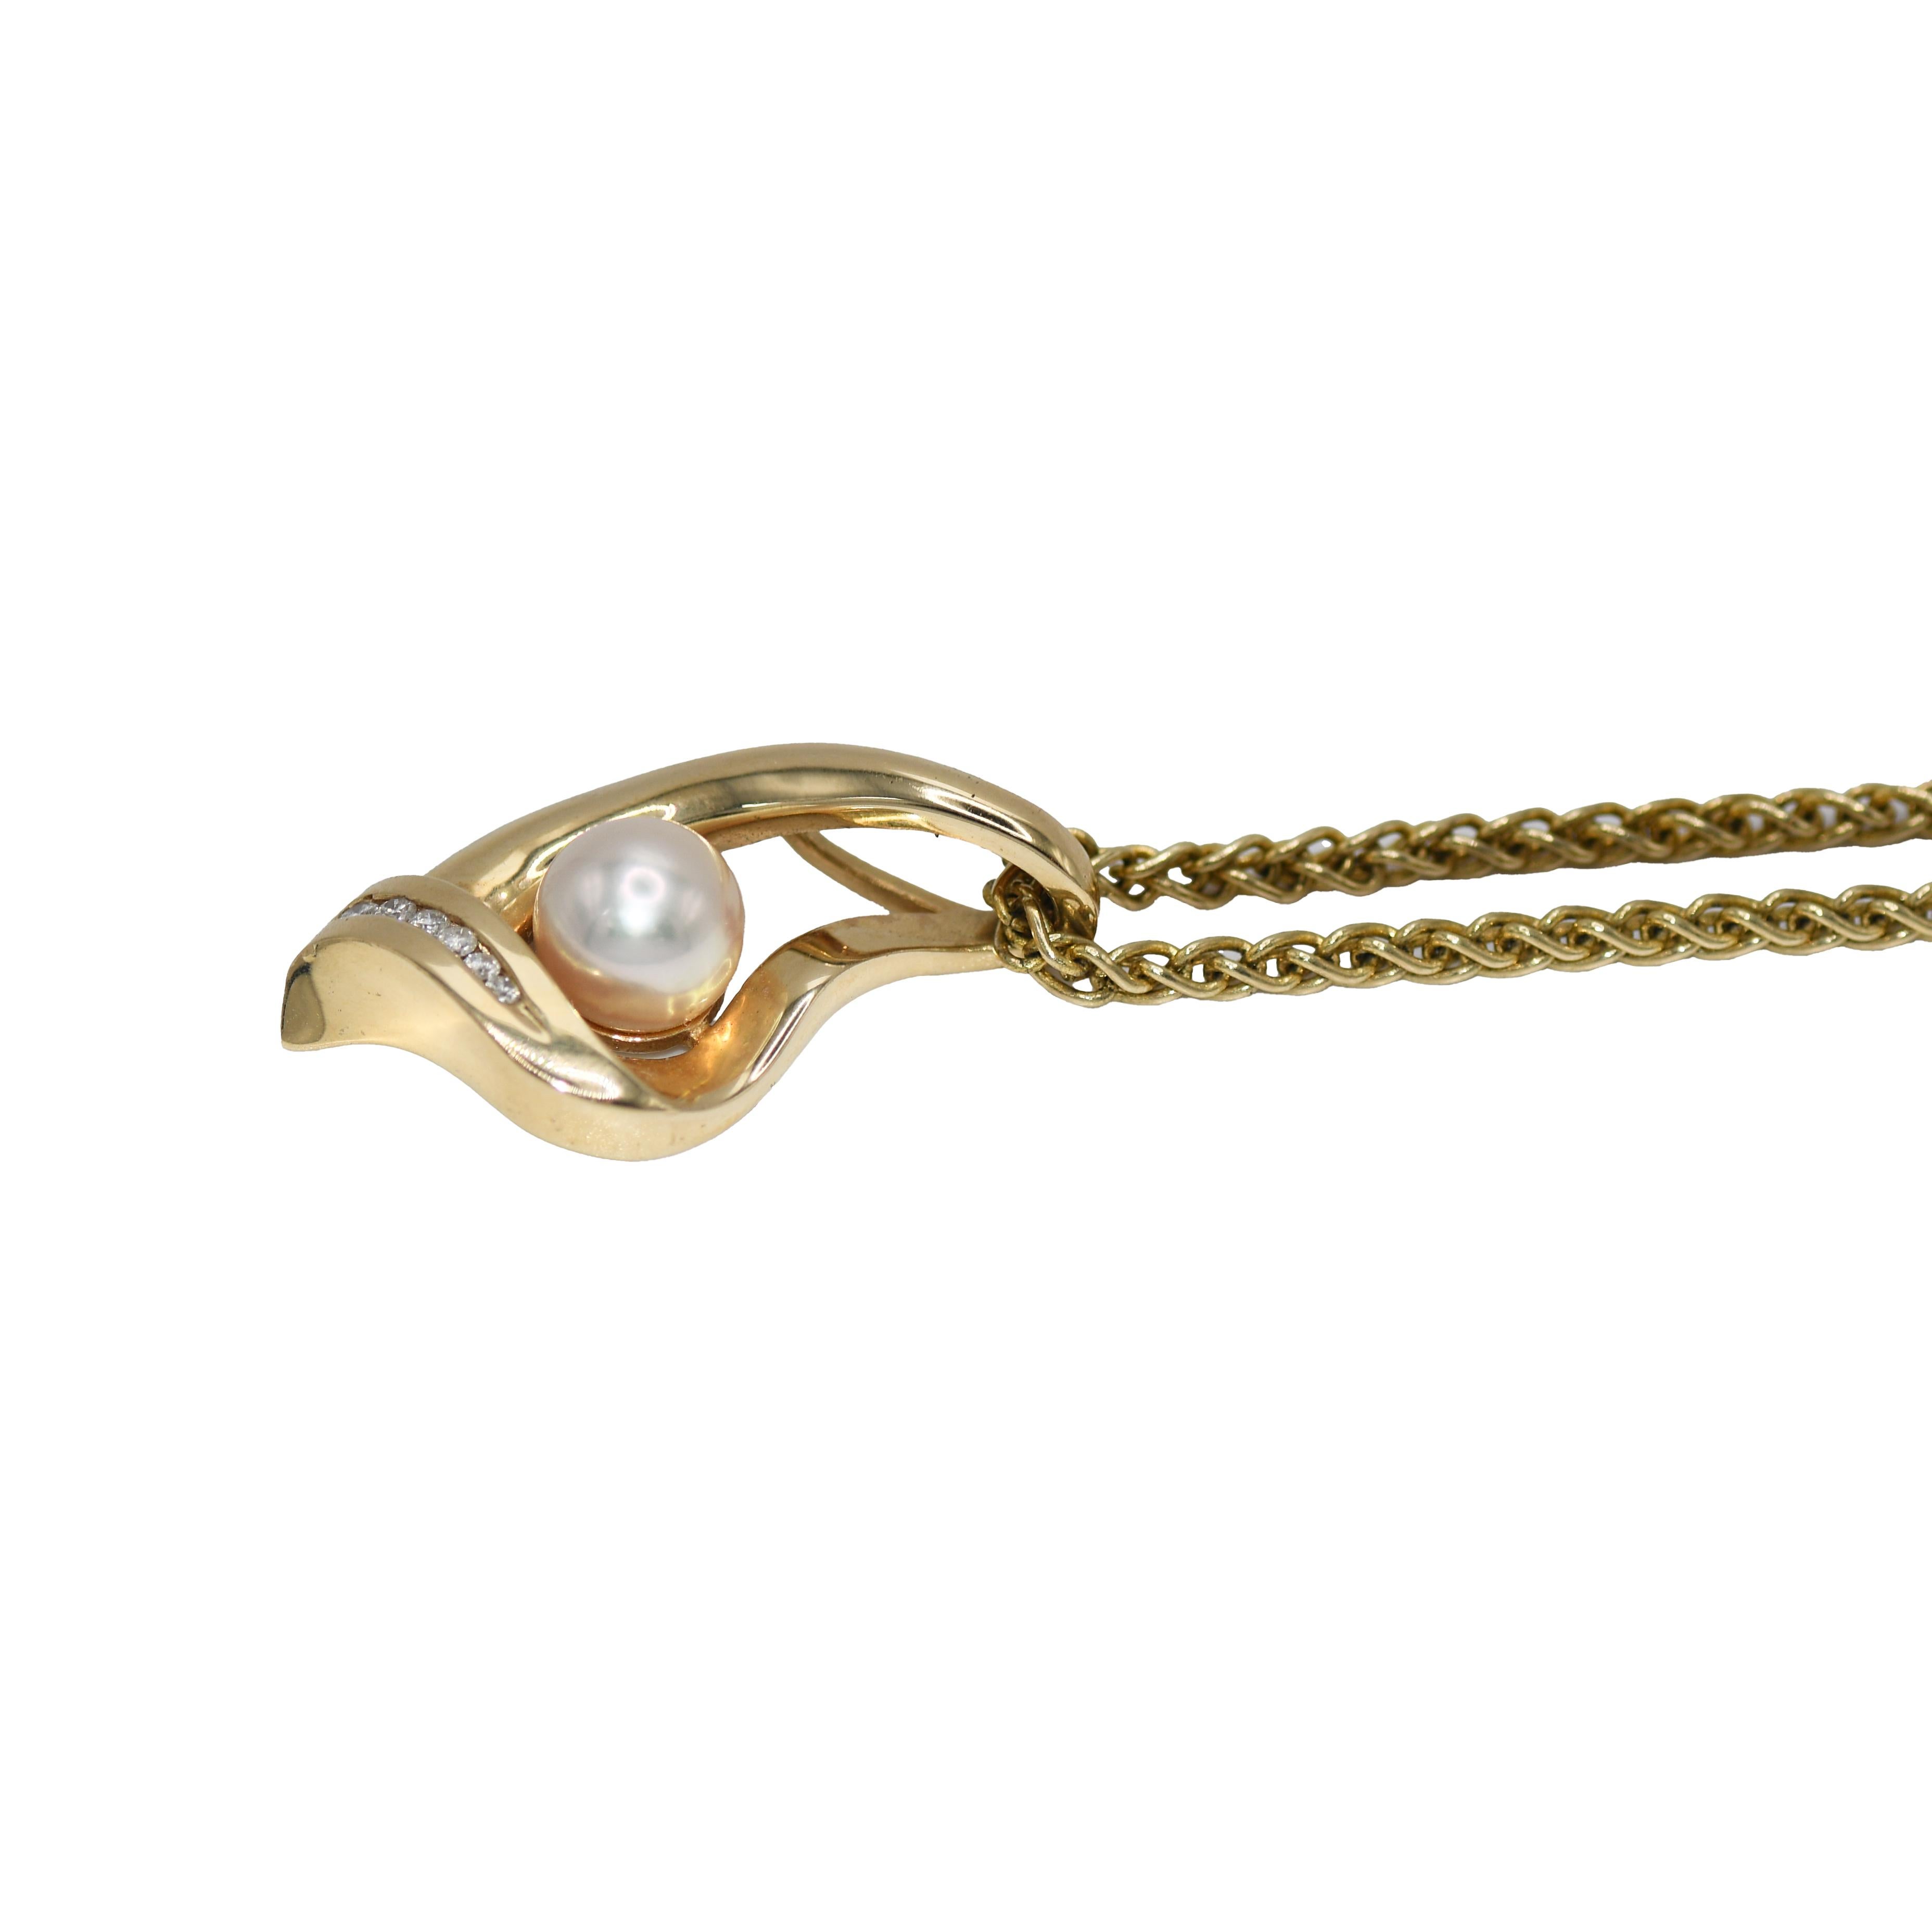 14K Yellow Gold Diamond and Pearl Necklace 16.5g

Elevate your jewelry collection with our 14K Yellow Gold Diamond & Pearl Necklace. This piece radiates sophistication and timeless charm. At its core is a lustrous pearl with a delicate pinkish tone,